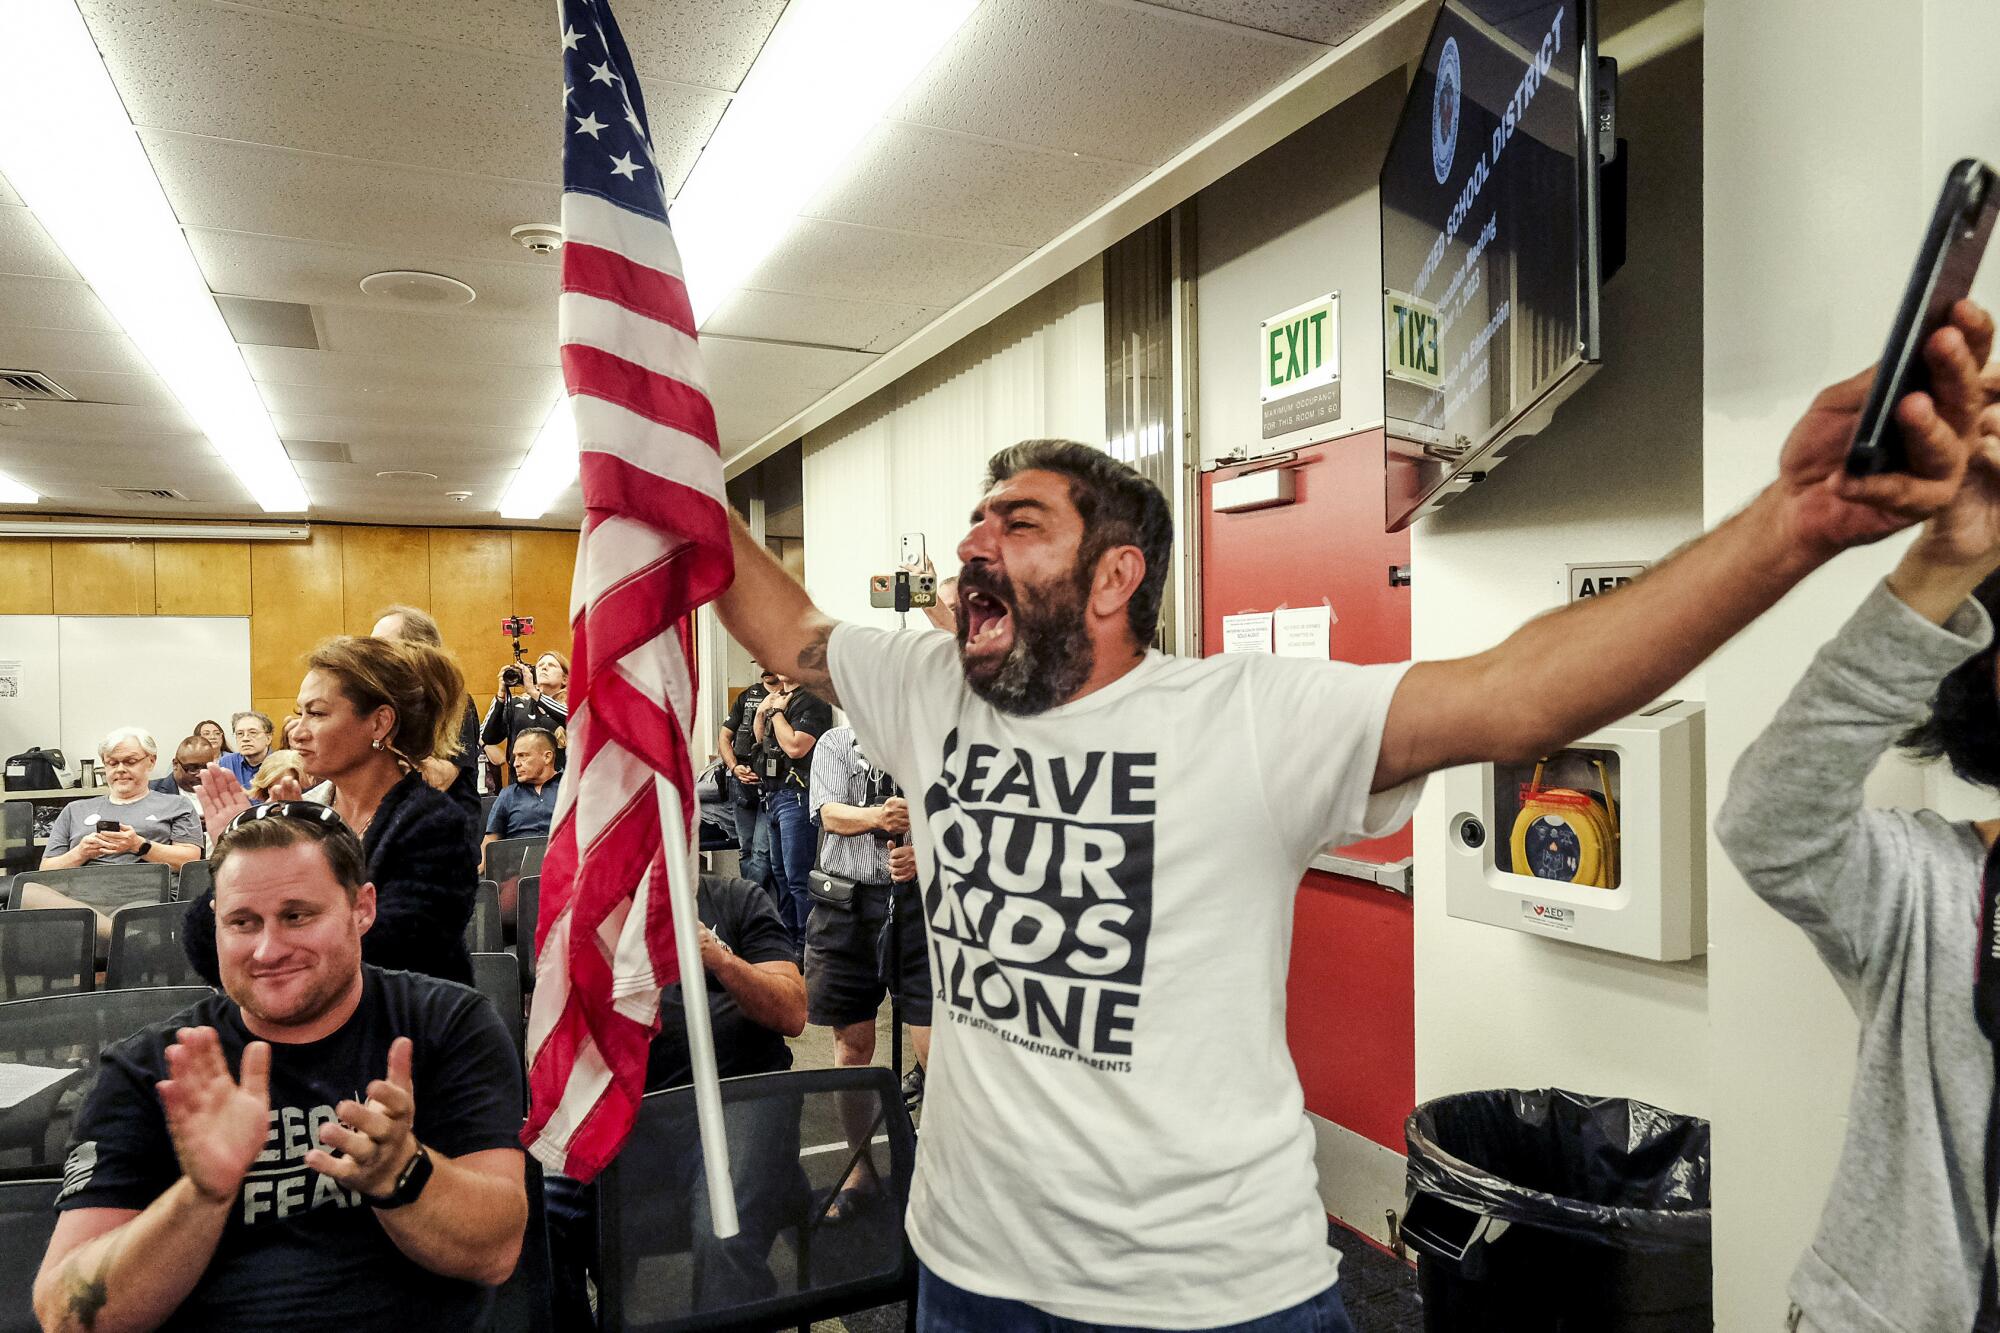 Manuk Grigoryan reacts after the Orange Unified School District board meeting on Sept. 7 in Orange.